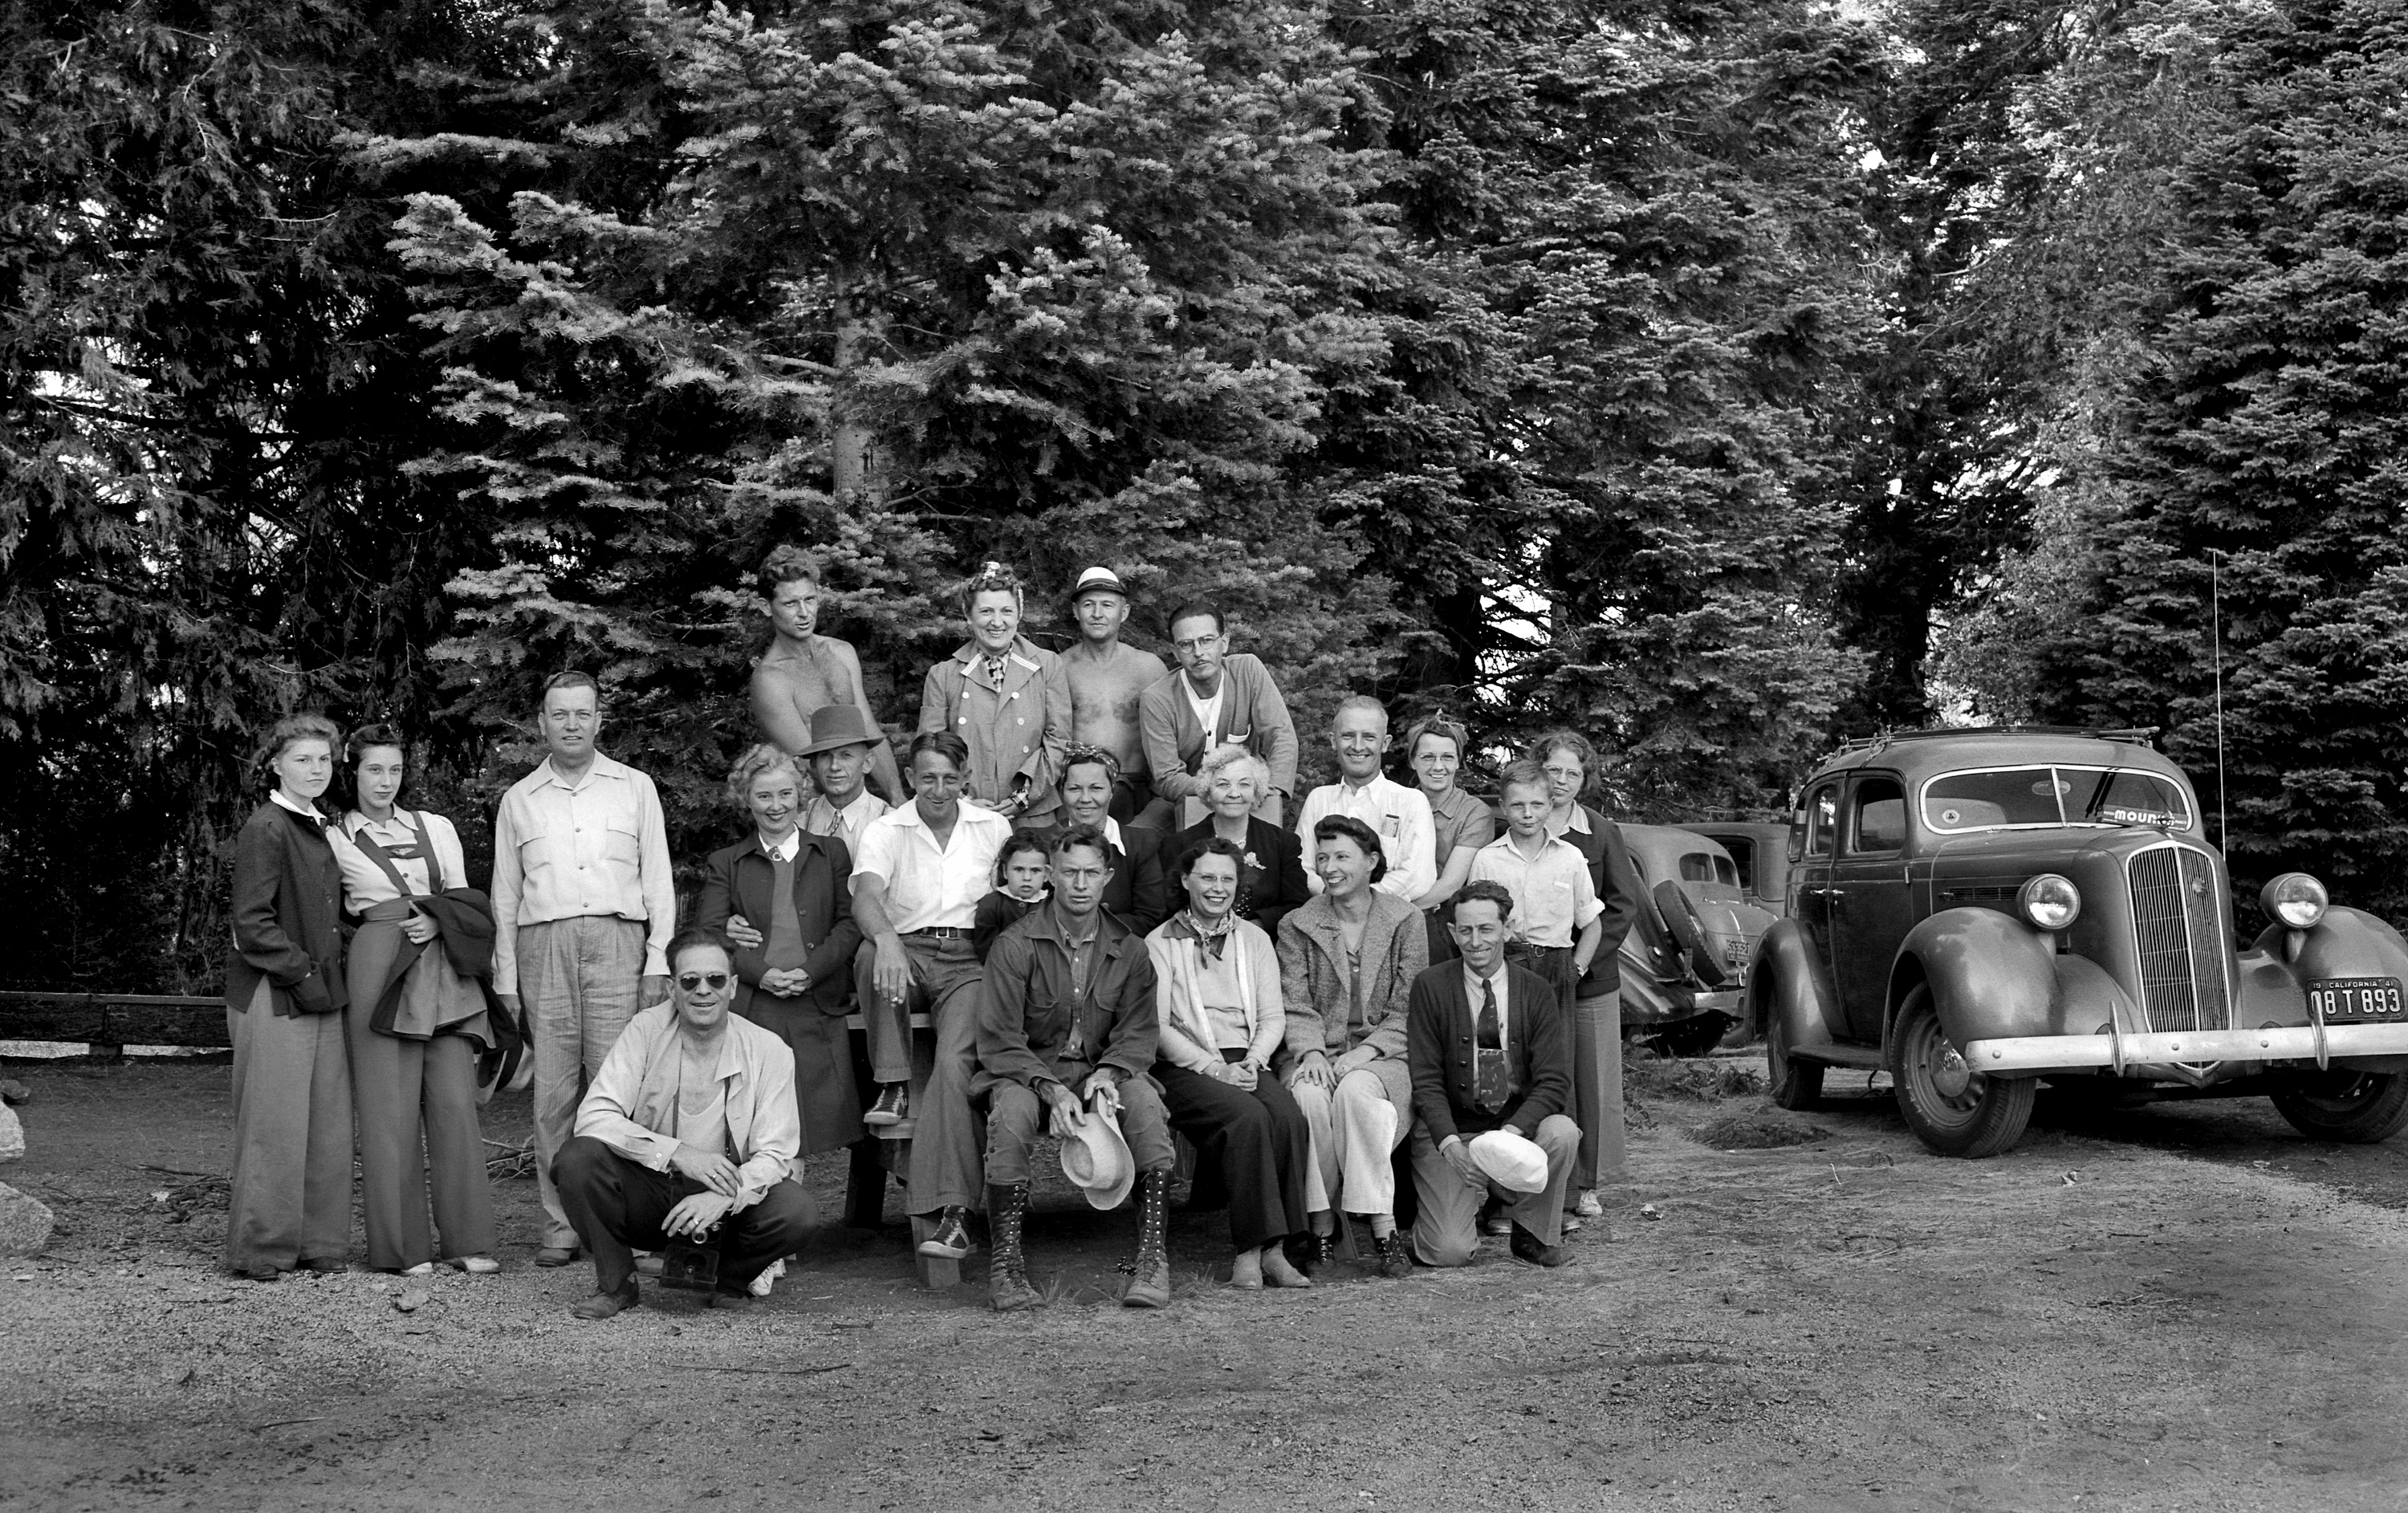 Here we see the Bliss family with friends in Yosemite. The year is 1940-41 based on the license plate to the right. The guy in the top row on the right reminds me of Richard from Boardwalk Empire. View full size.